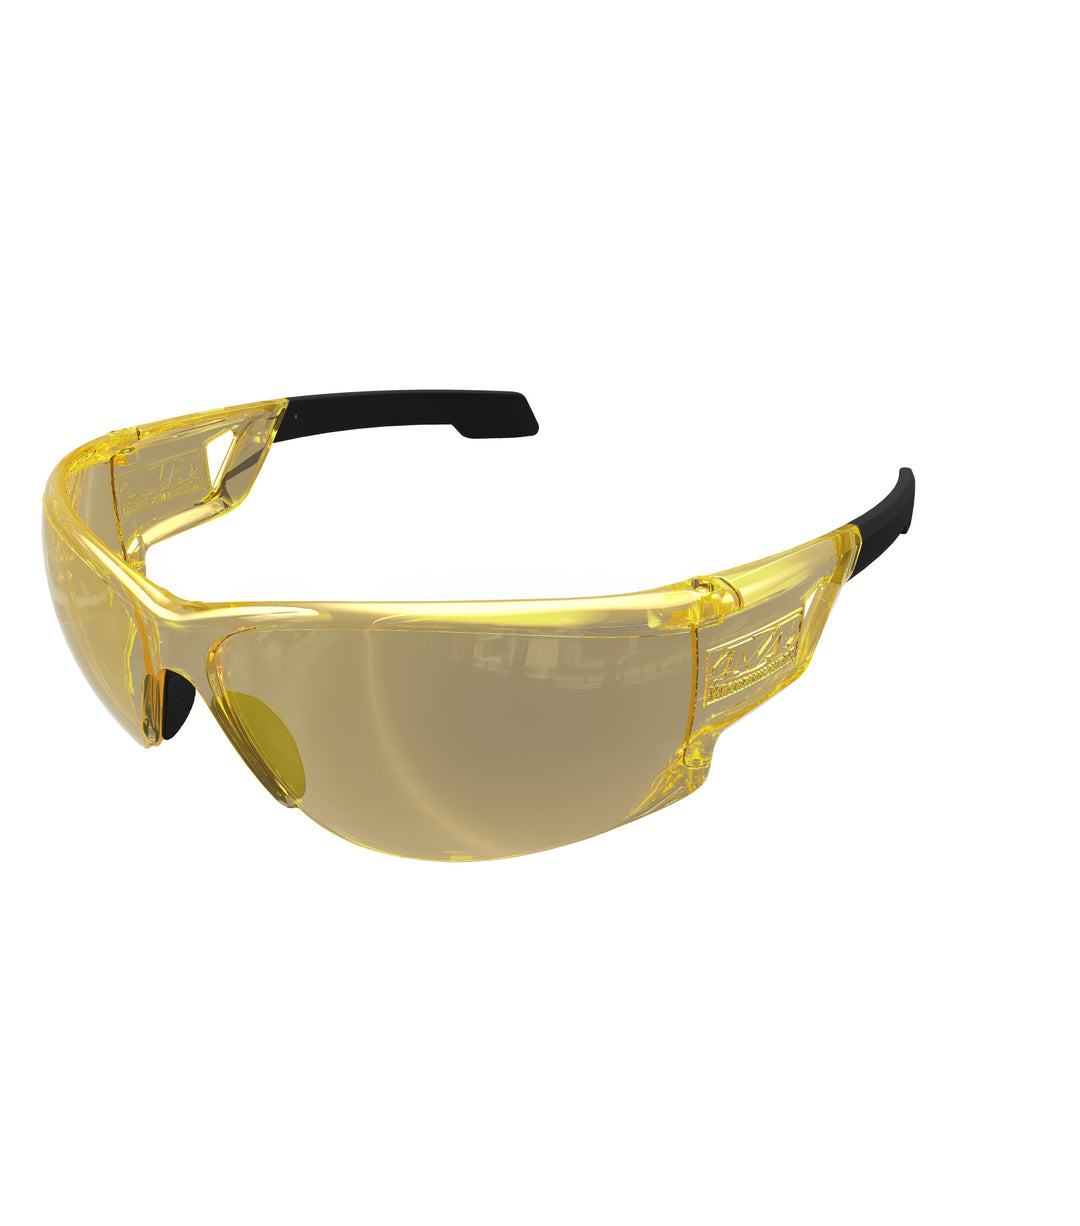 Type-N Tactical Glasses With a Amber Frame and Amber Lens